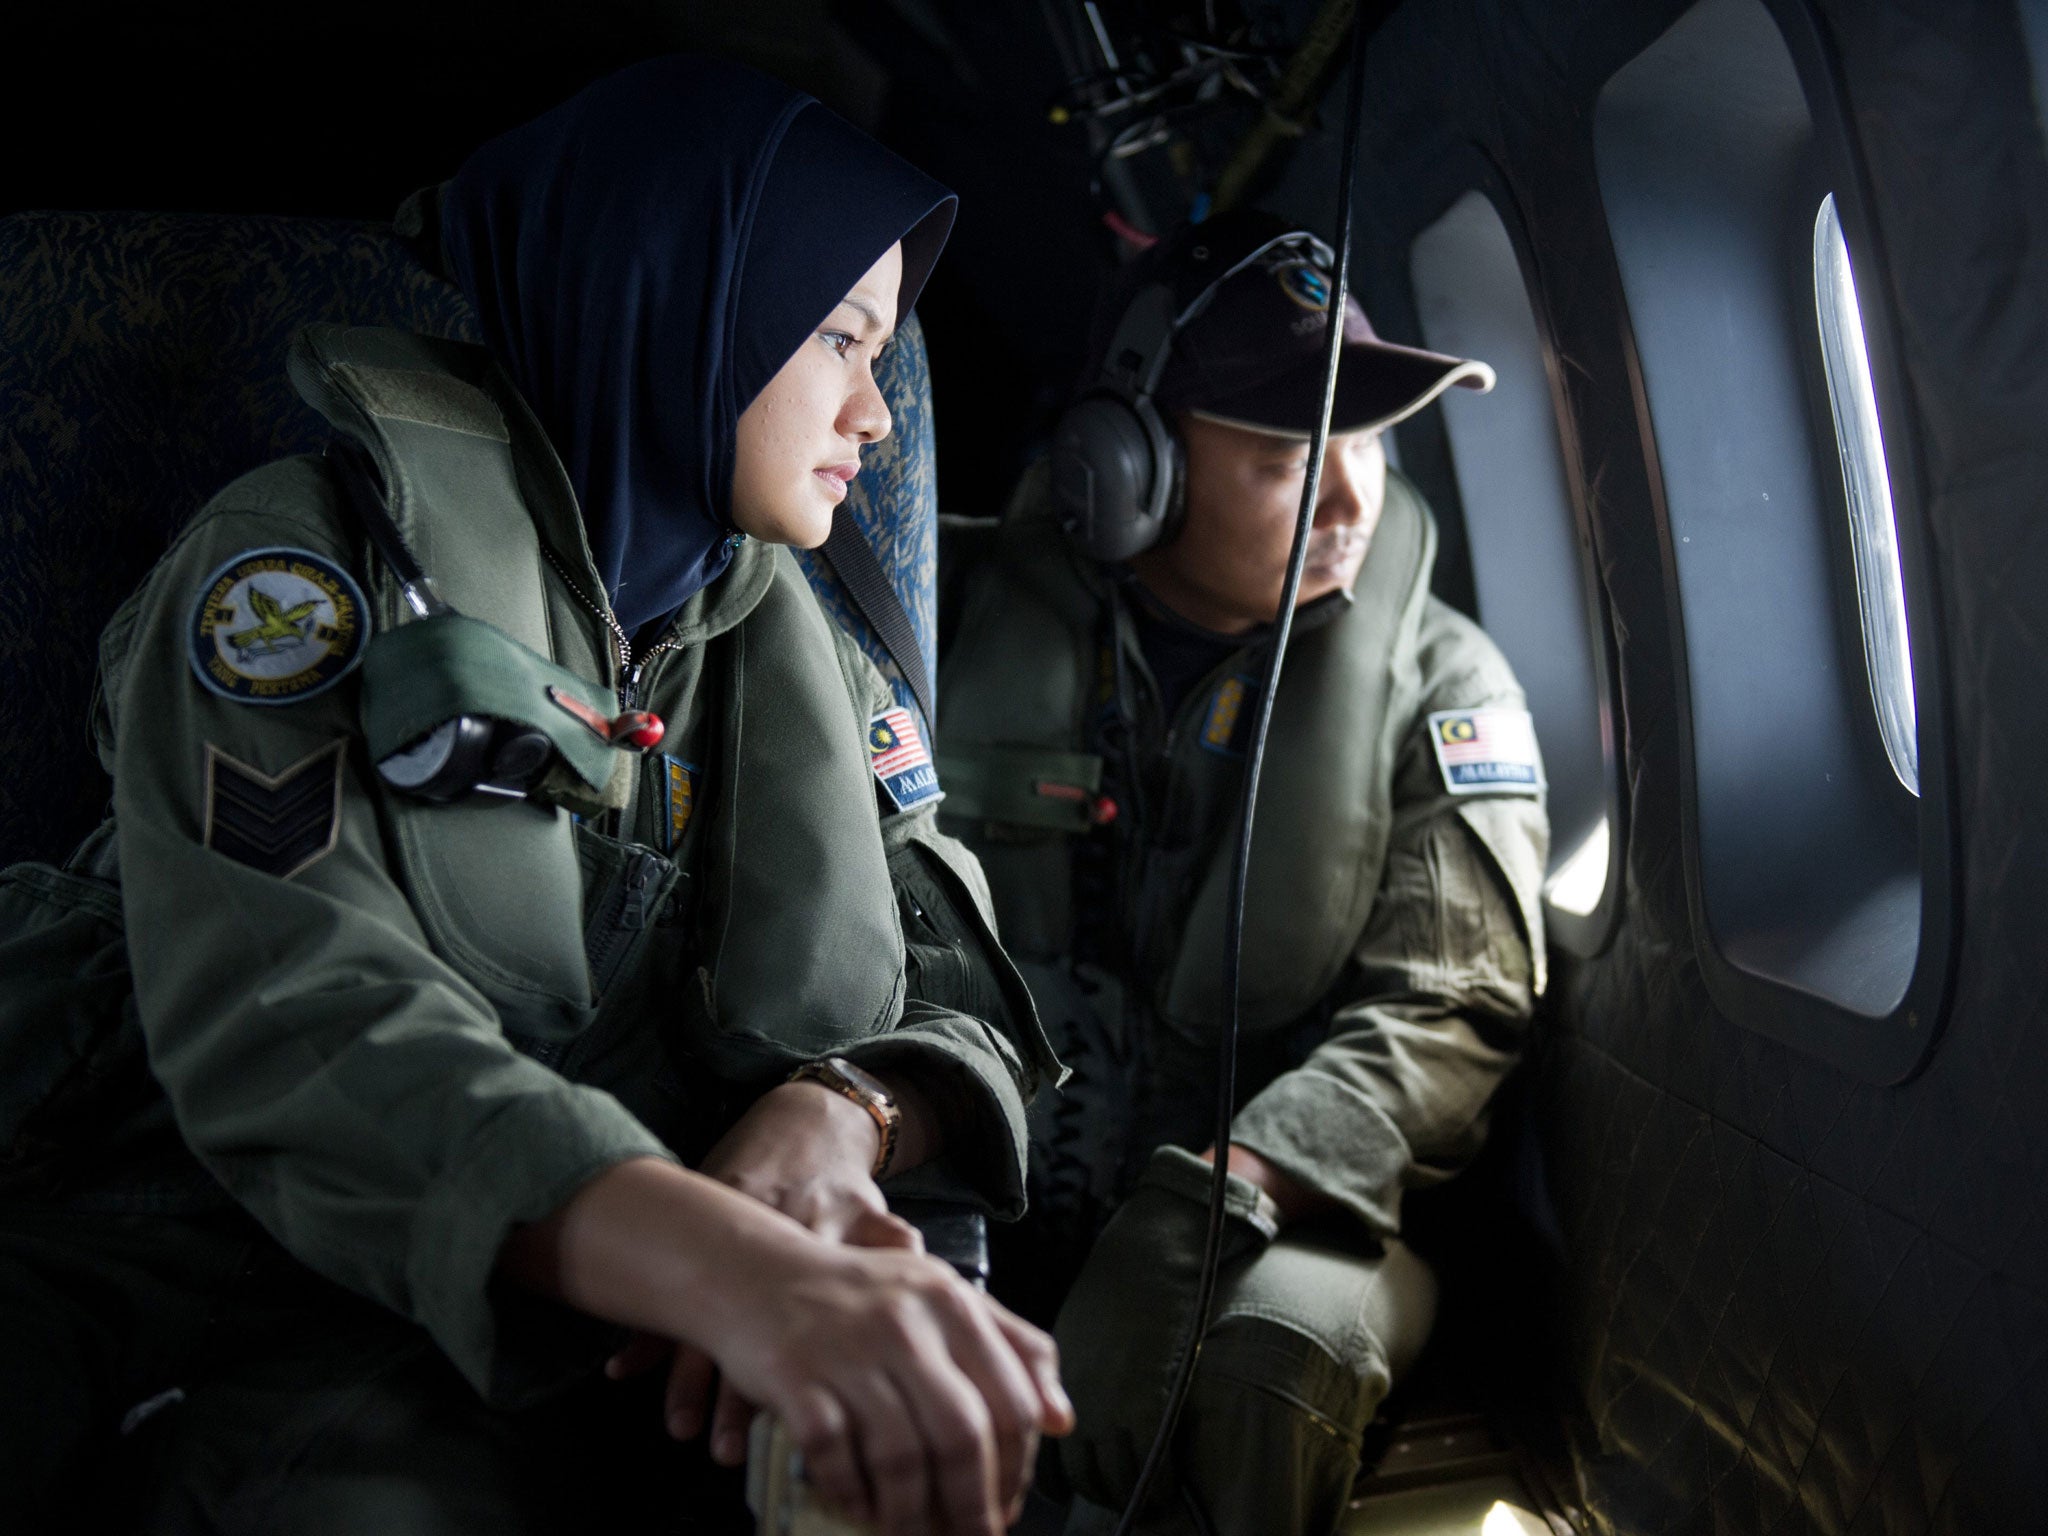 Crew members look outside windows from a Malaysian Air Force CN235 aircraft during a search and rescue (SAR) operation to find the missing Malaysia Airlines flight MH370 plane over the Strait of Malacca